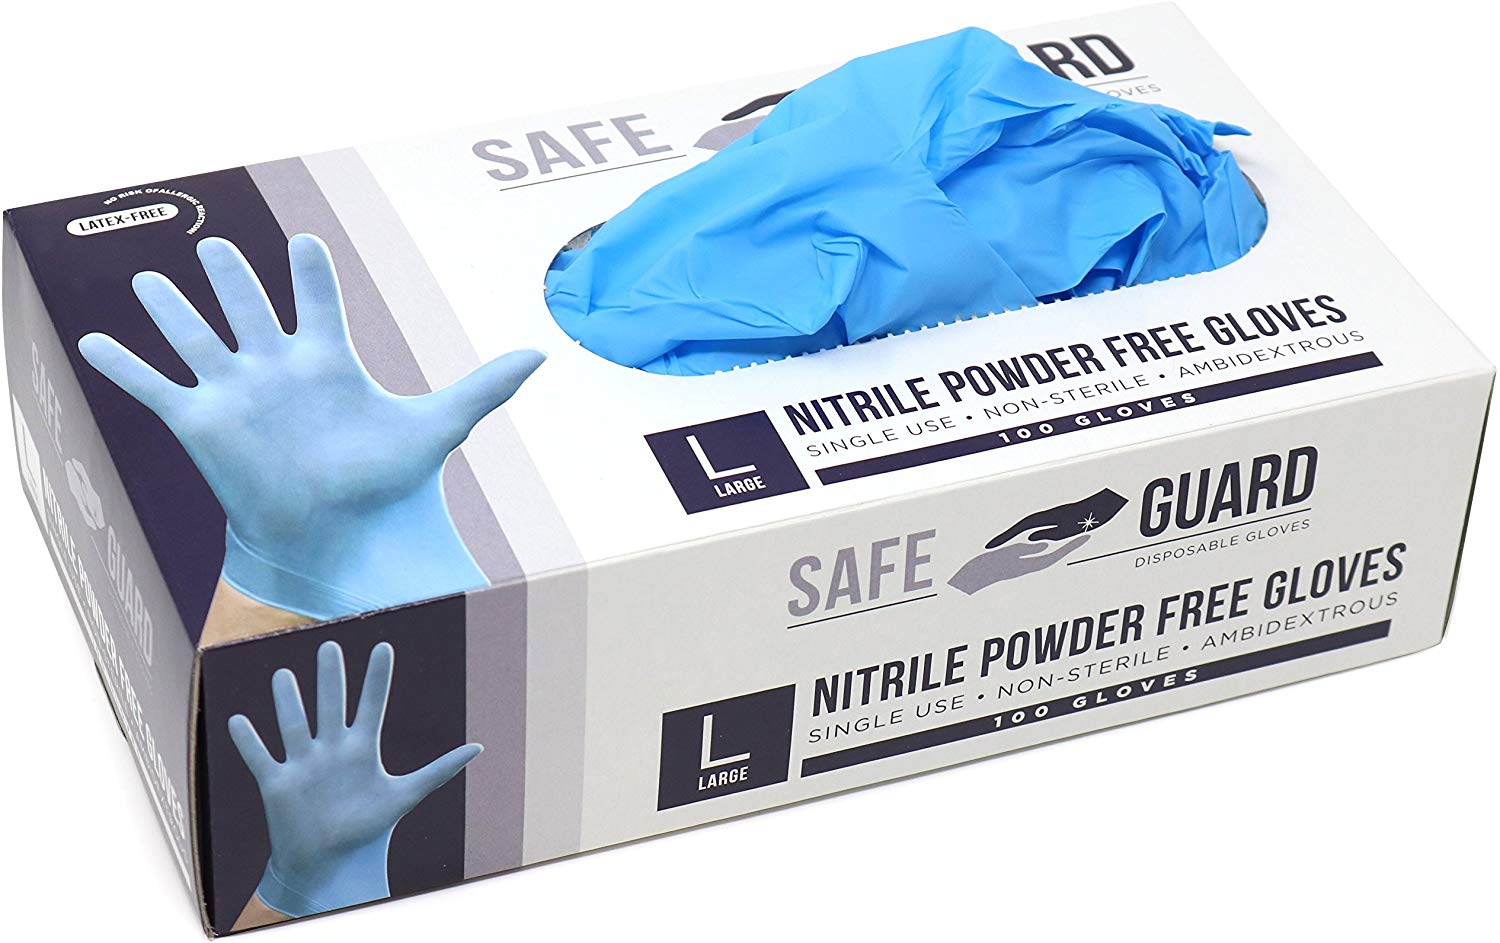 Industrial Blue Medium 4 Mil Powder Free Box of 100 AMMEX Nitrile Industrial Disposable Gloves Textured Latex Free Ambidextrous